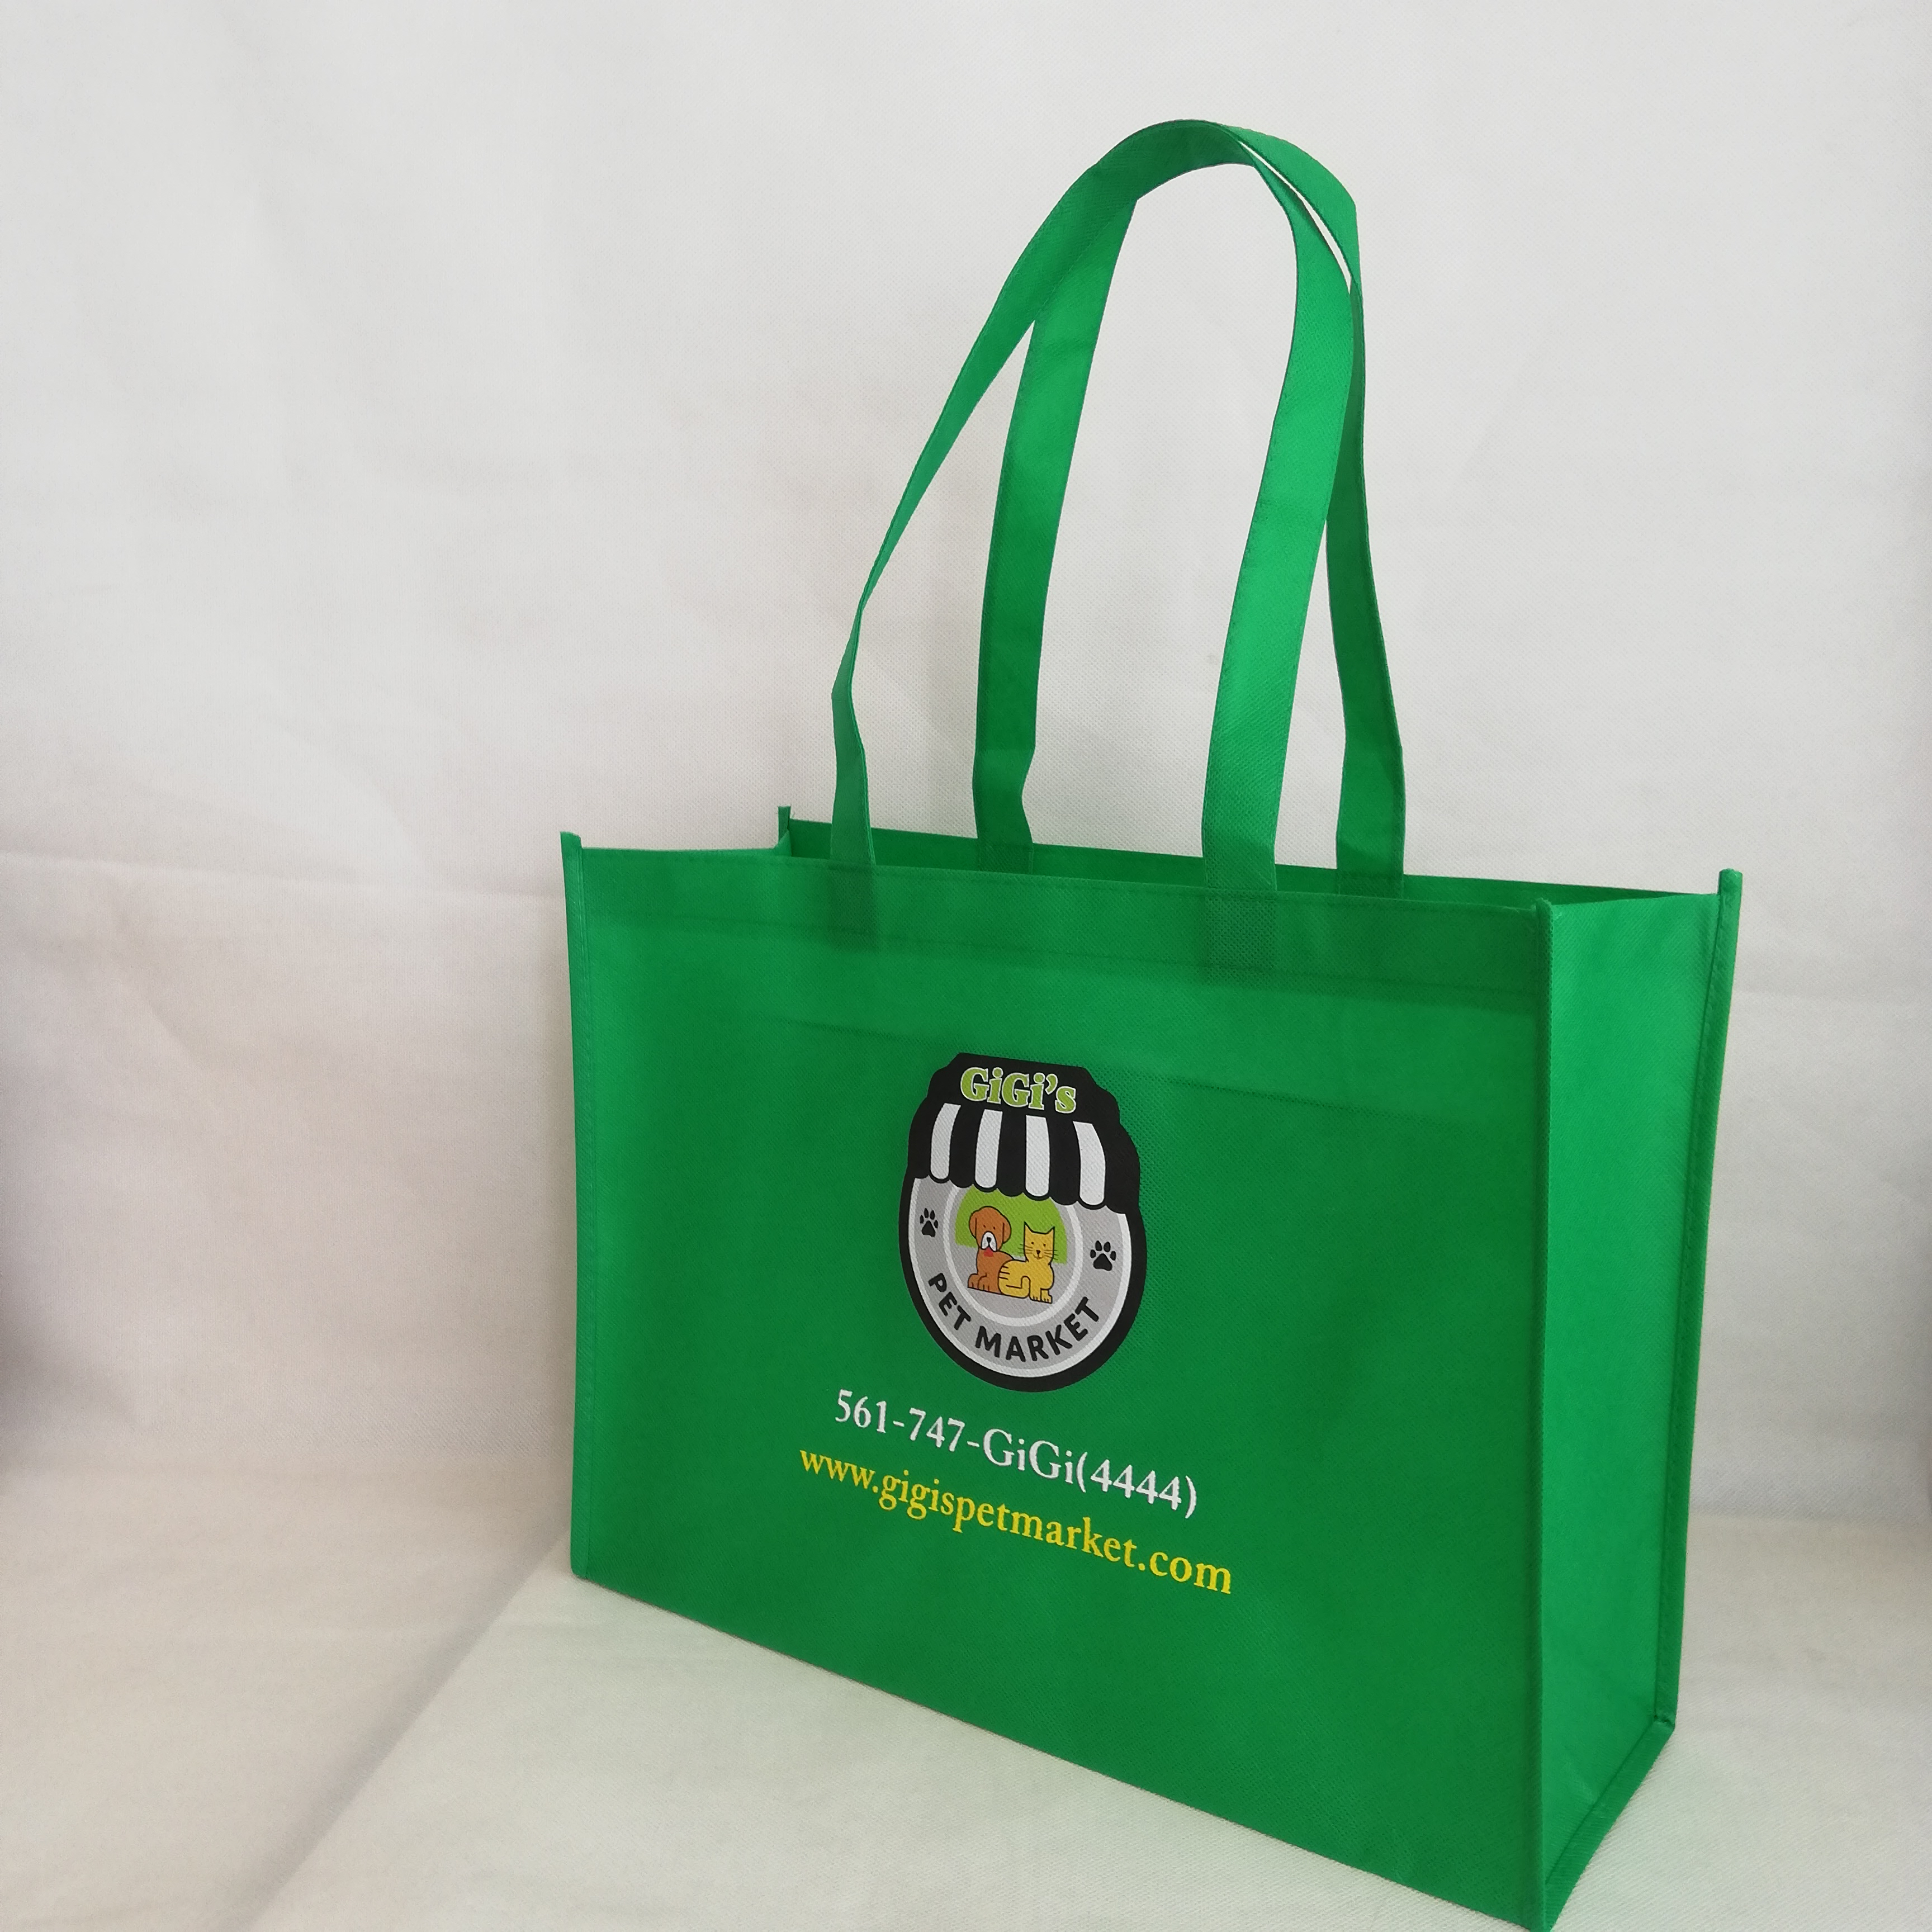 1000pcs/lot Reusable Promotion Non-woven Bags Custom Shopping Bag with Your Logo Market Store Banquet Using Wholesales